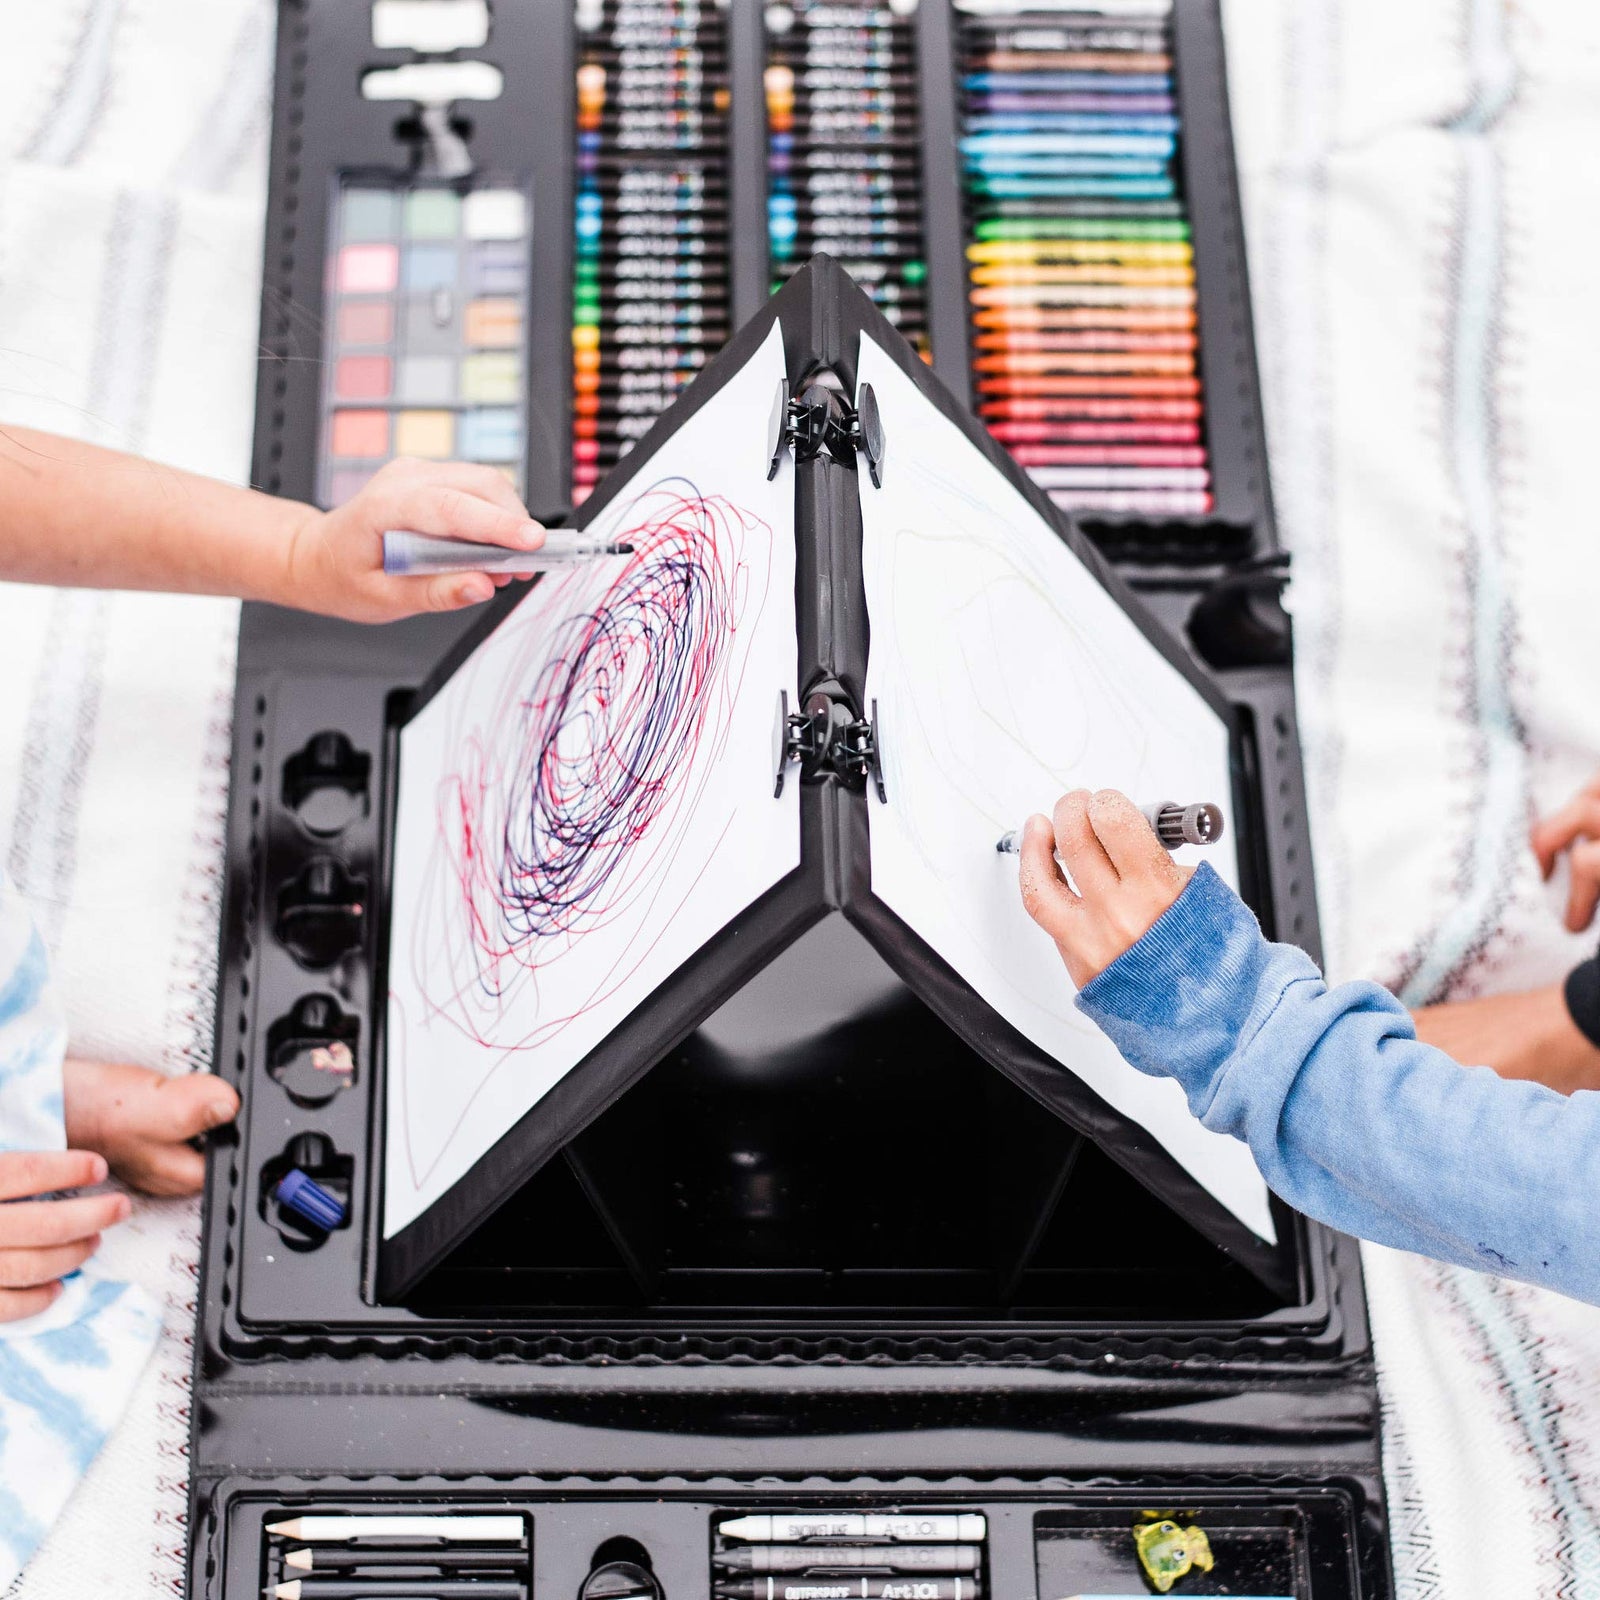 Art 101 Budding Artist 179 Piece Draw Paint and Create Art Set with Pop-Up Double-Sided Easel, Includes markers, crayons, paints, colored pencils, Case includes pop up easel, Portable Art Studio